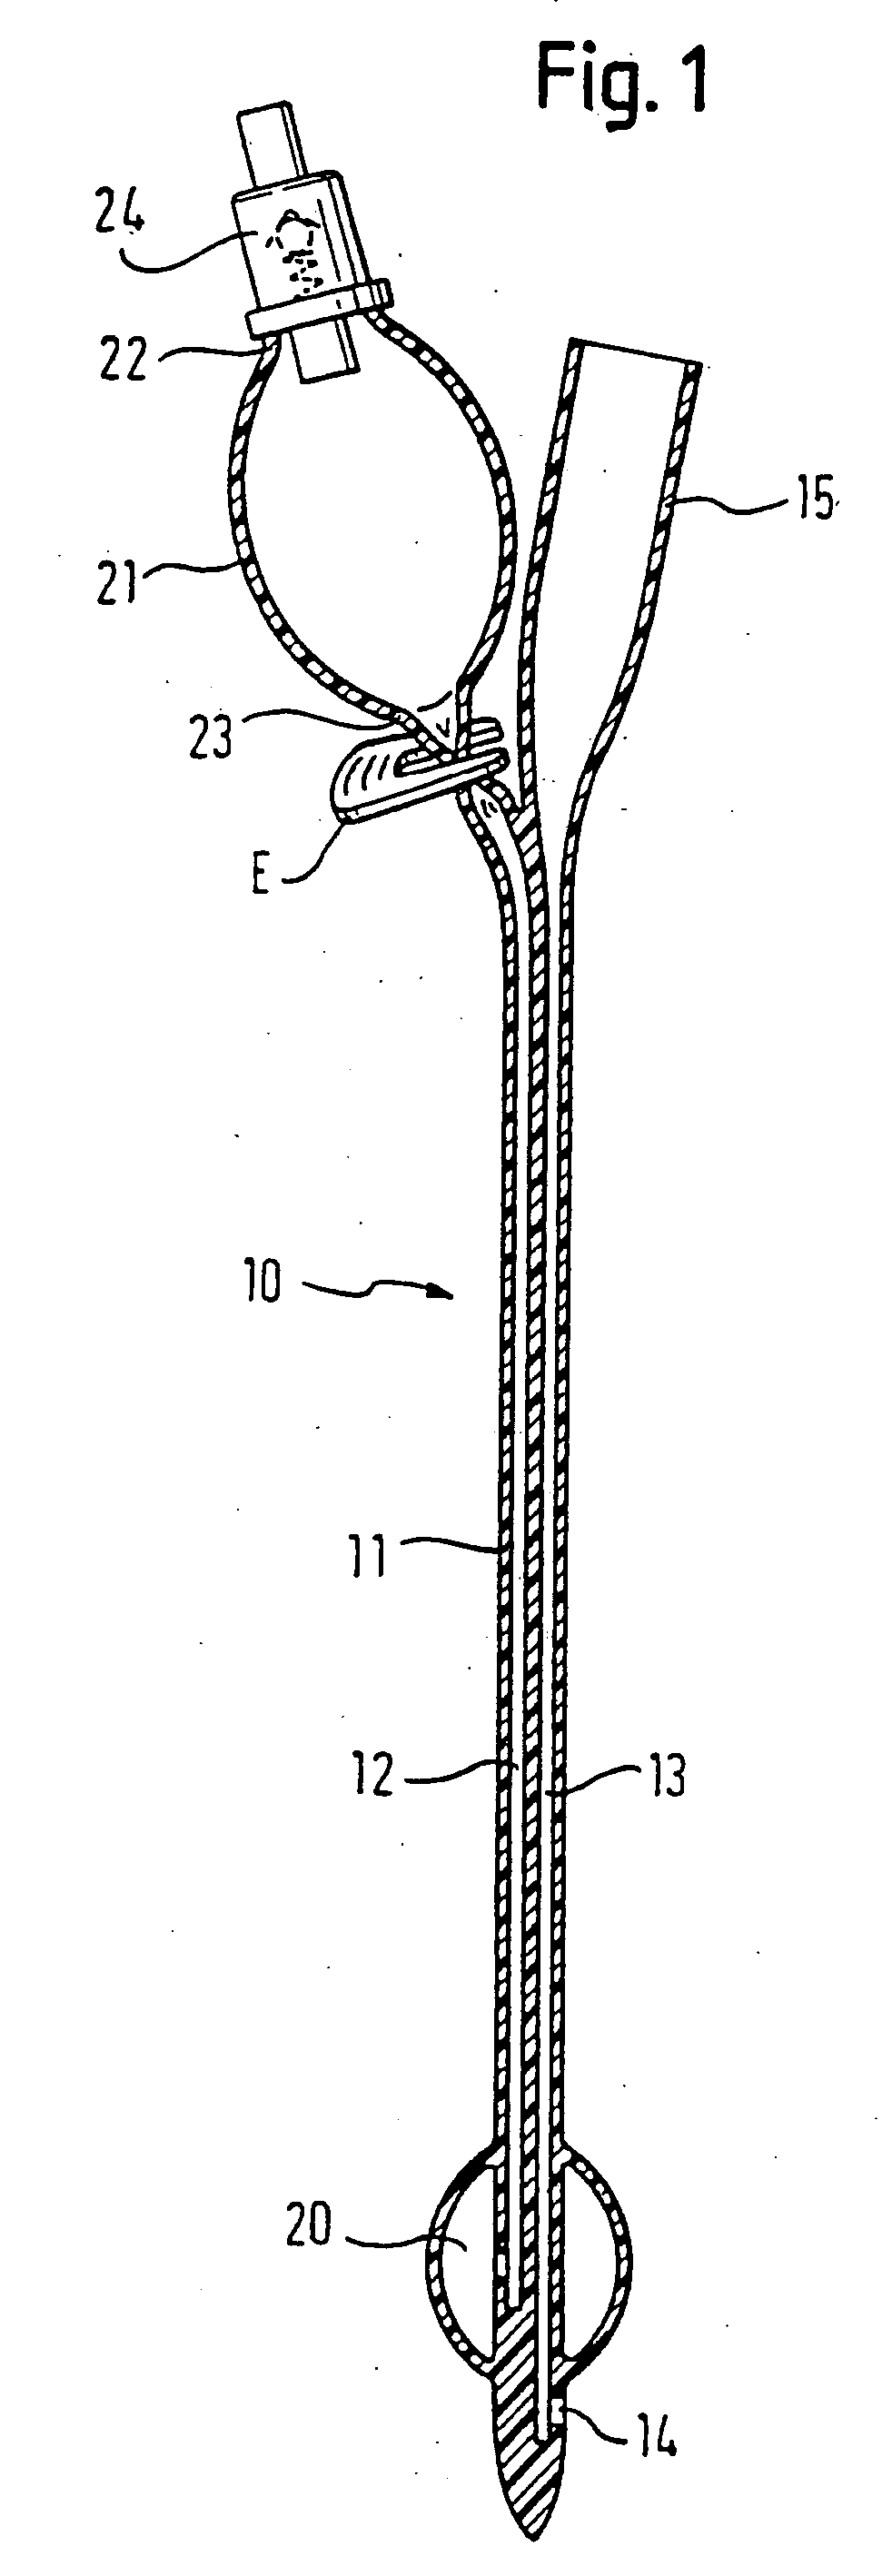 Medical device with elastomeric bulb